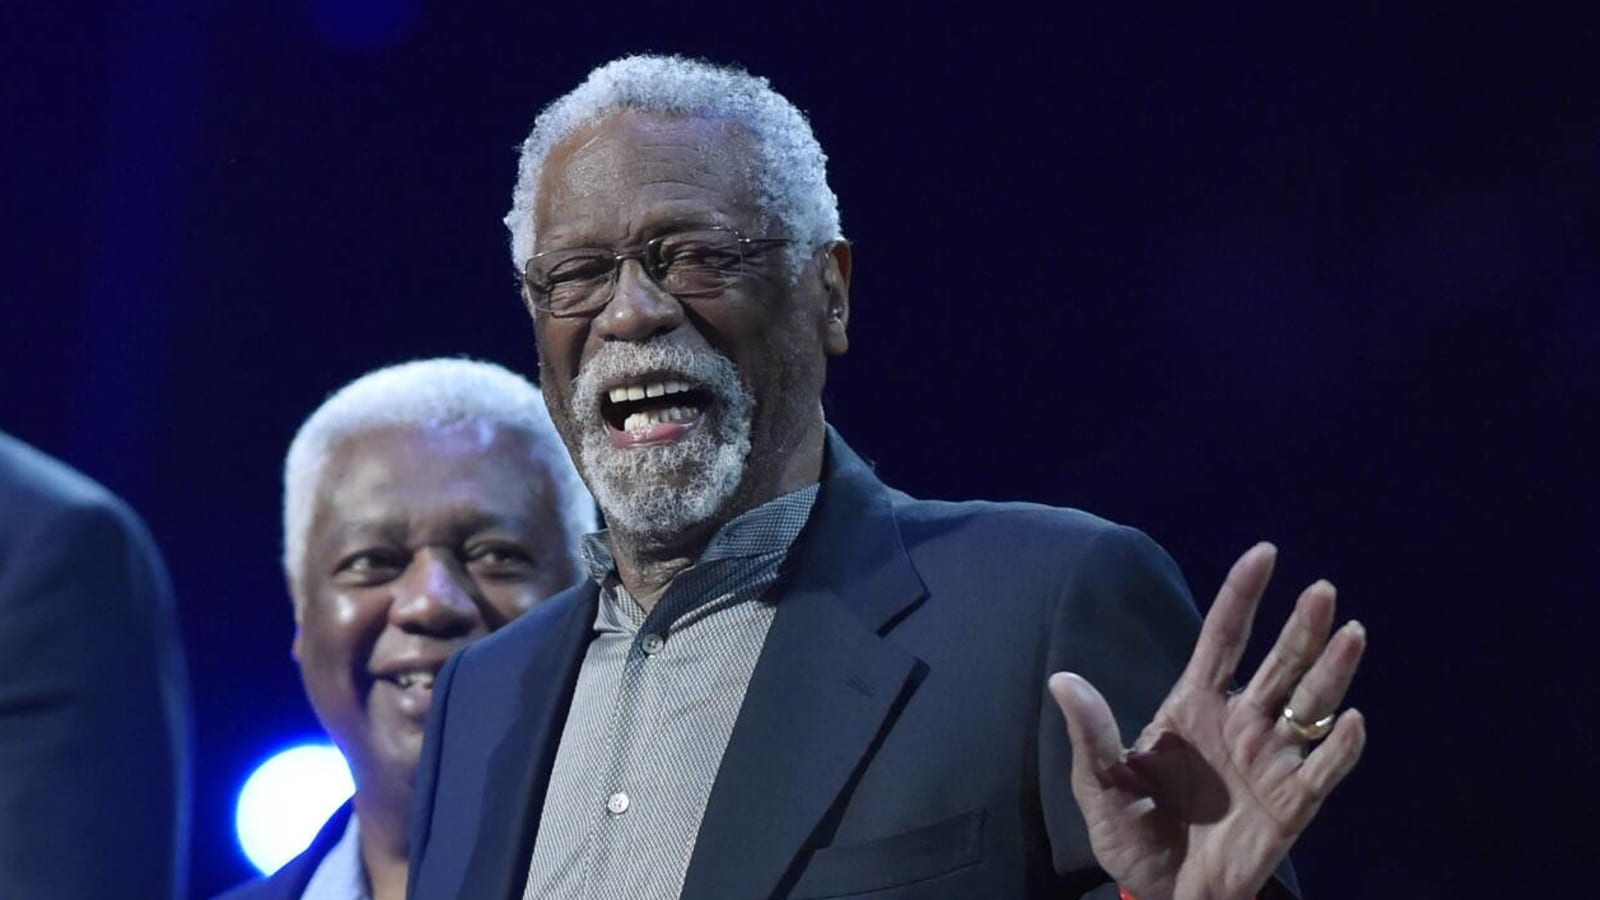 Gregg Popovich on Bill Russell: 'He truly made the world a better place'